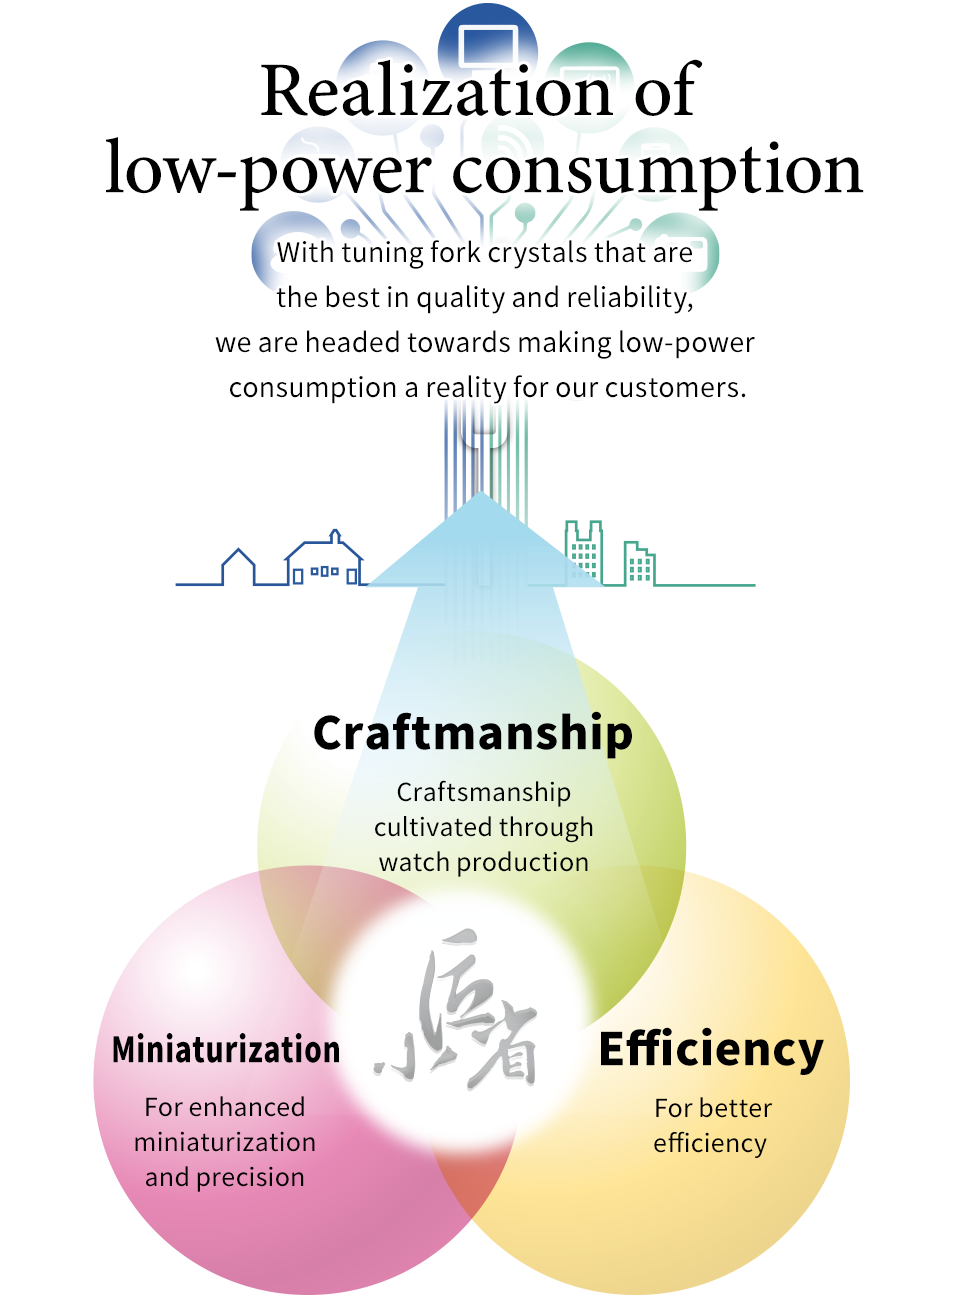 Realization of low-power consumption